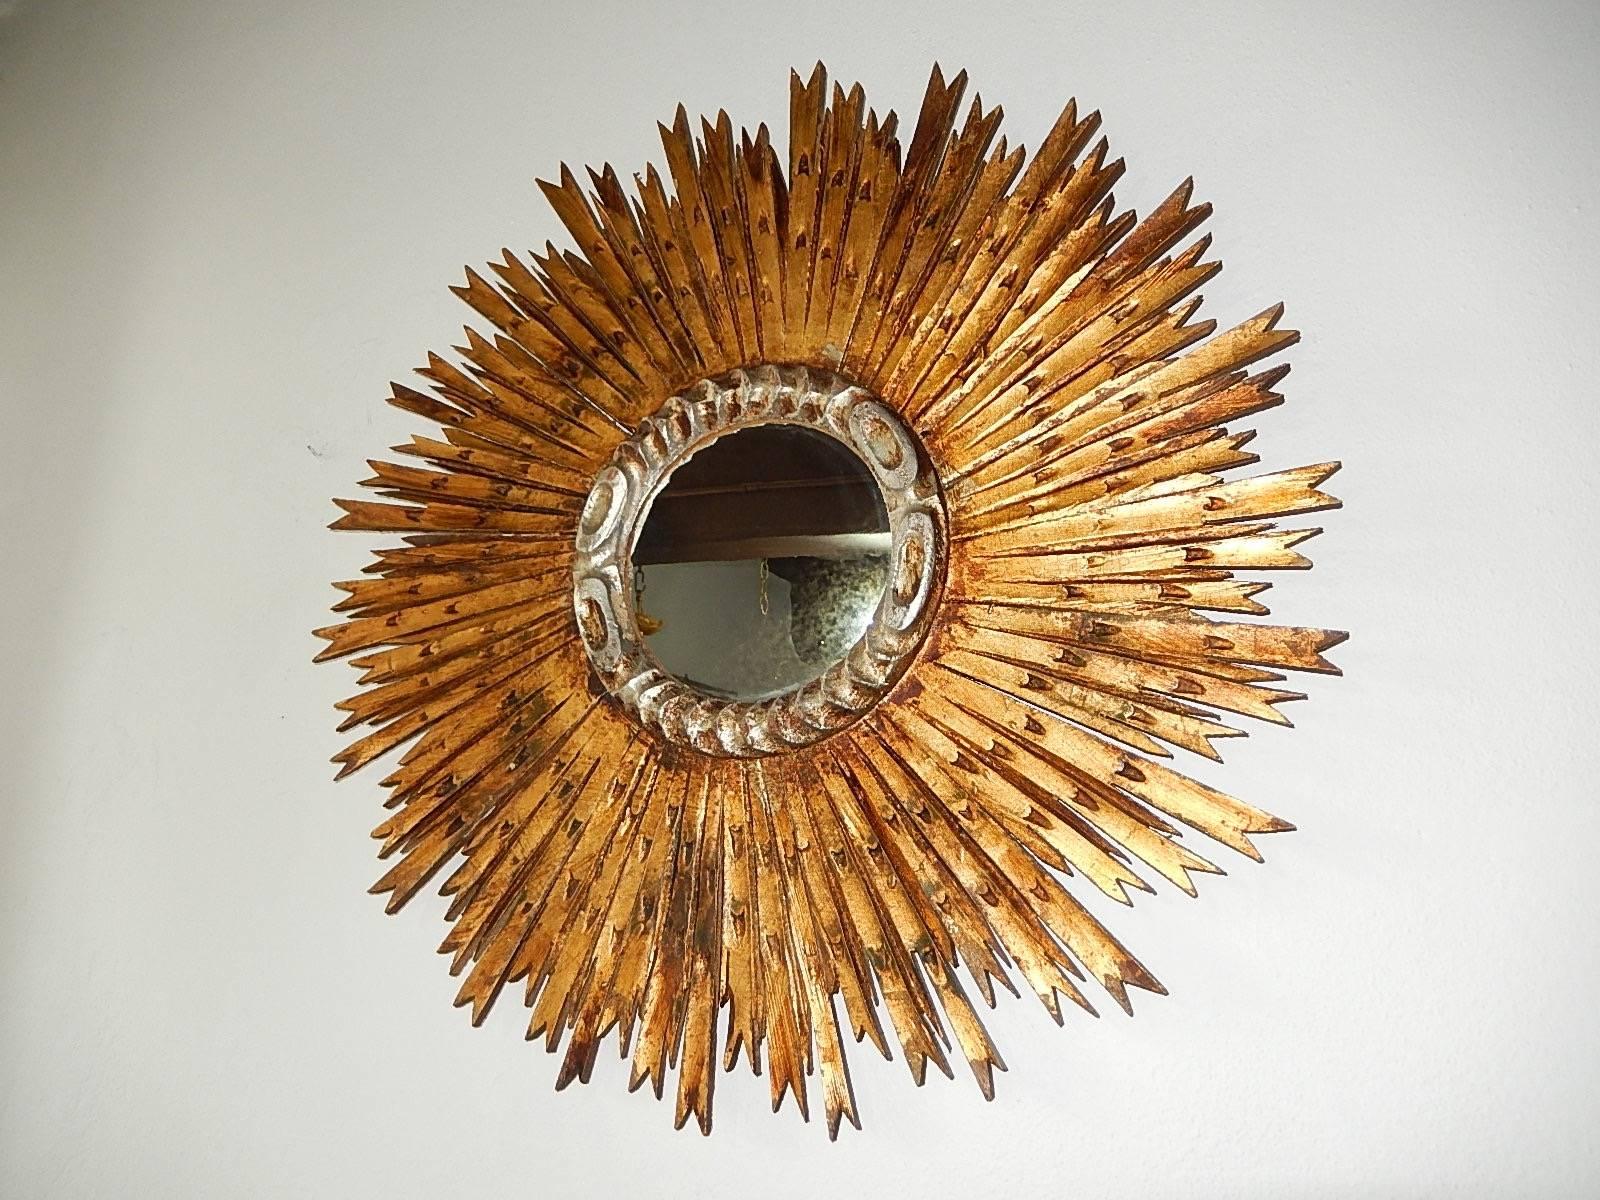 Beautiful gold gilt rays and silvered center. Center mirror measures 7.5 inches. Complete measures 27 inches. Free priority shipping from Italy.